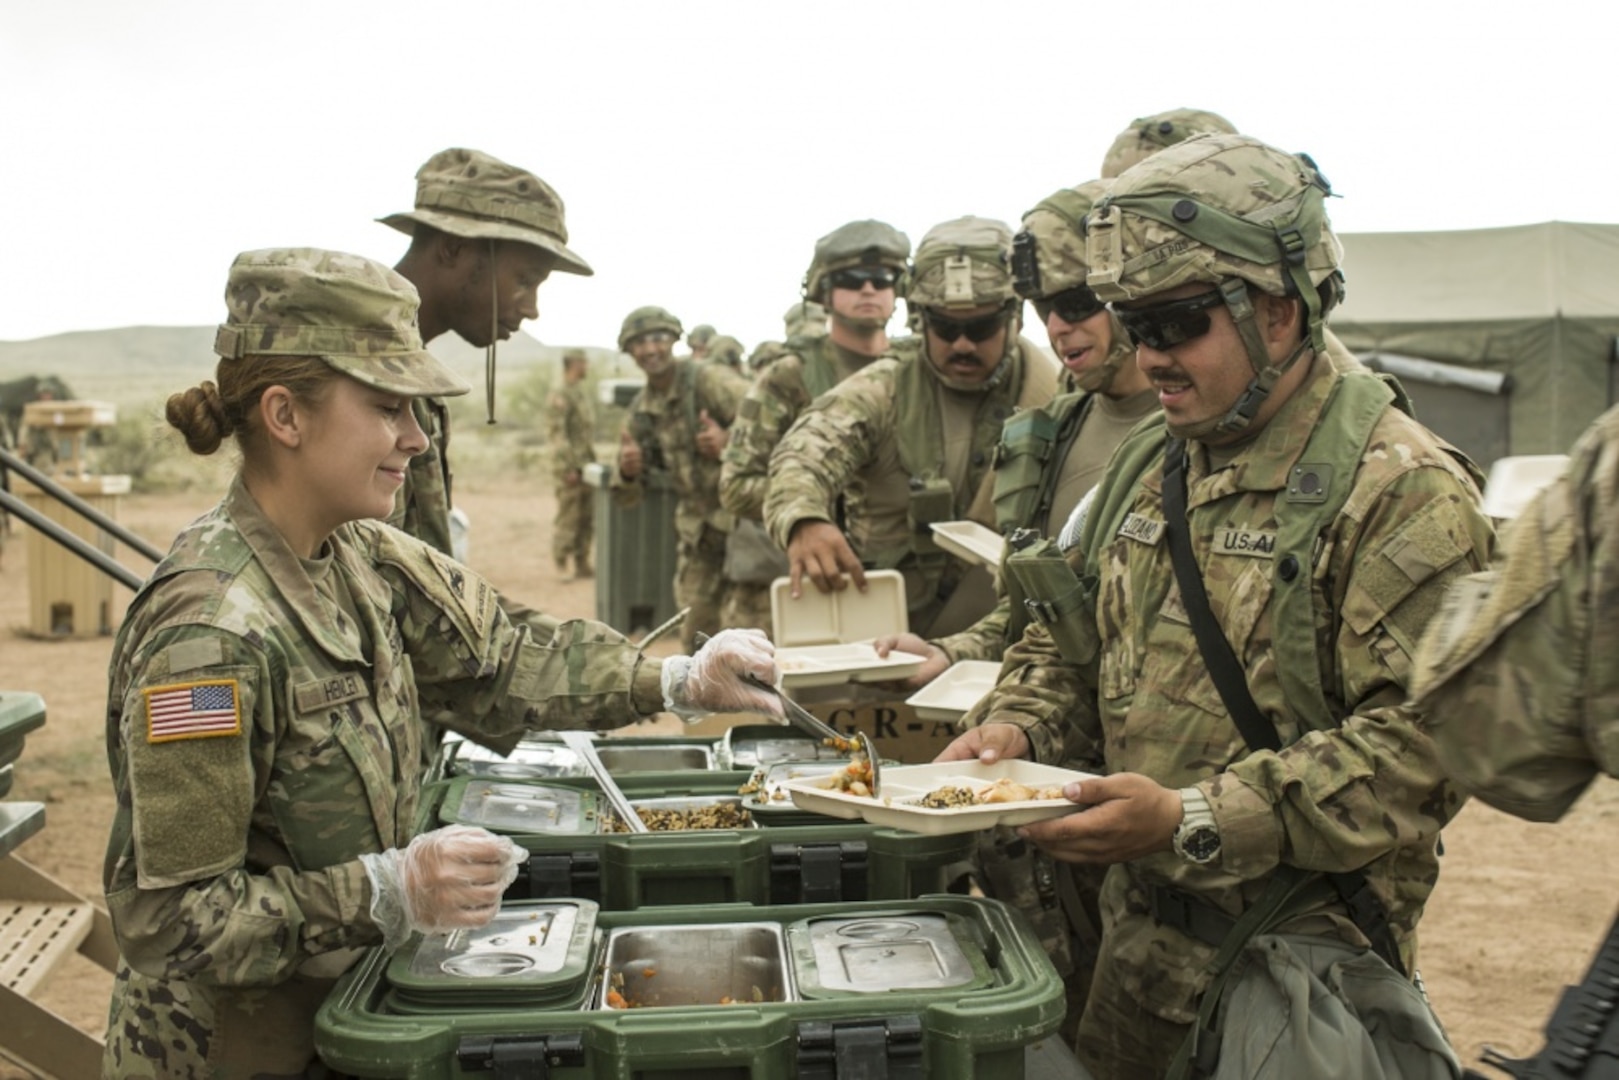 Soldiers assigned to 1st Armored Division receive meals during the Iron Focus exercise. In addition to physical exercise, proper nutrition plays a major role in overall health, fitness, and training for the Army Combat Fitness Test, says an Army dietitian.